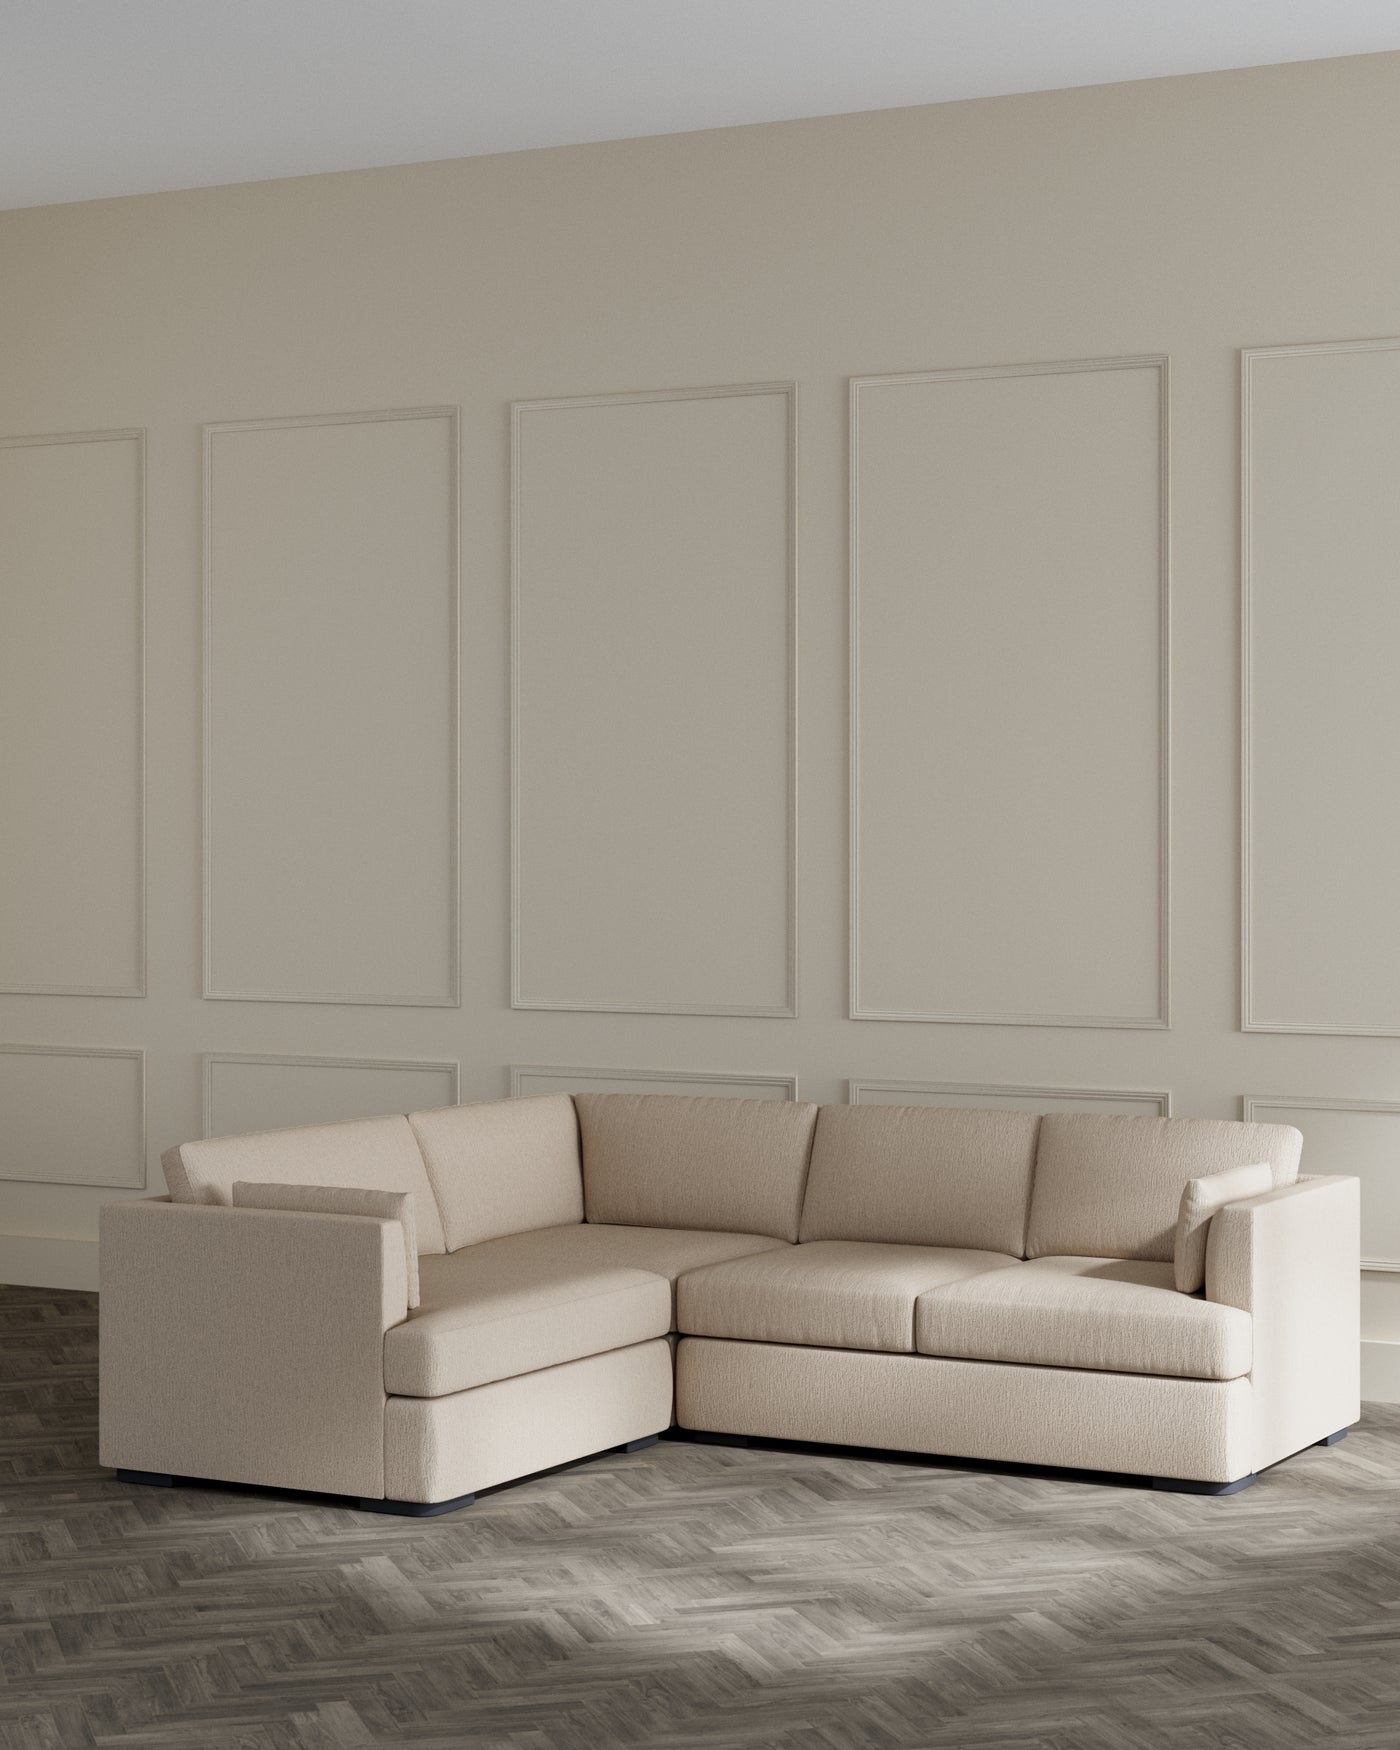 Modern beige L-shaped sectional sofa with a minimalist design and clean lines, set against a neutral wall with decorative panelling, positioned on a dark herringbone-patterned floor.